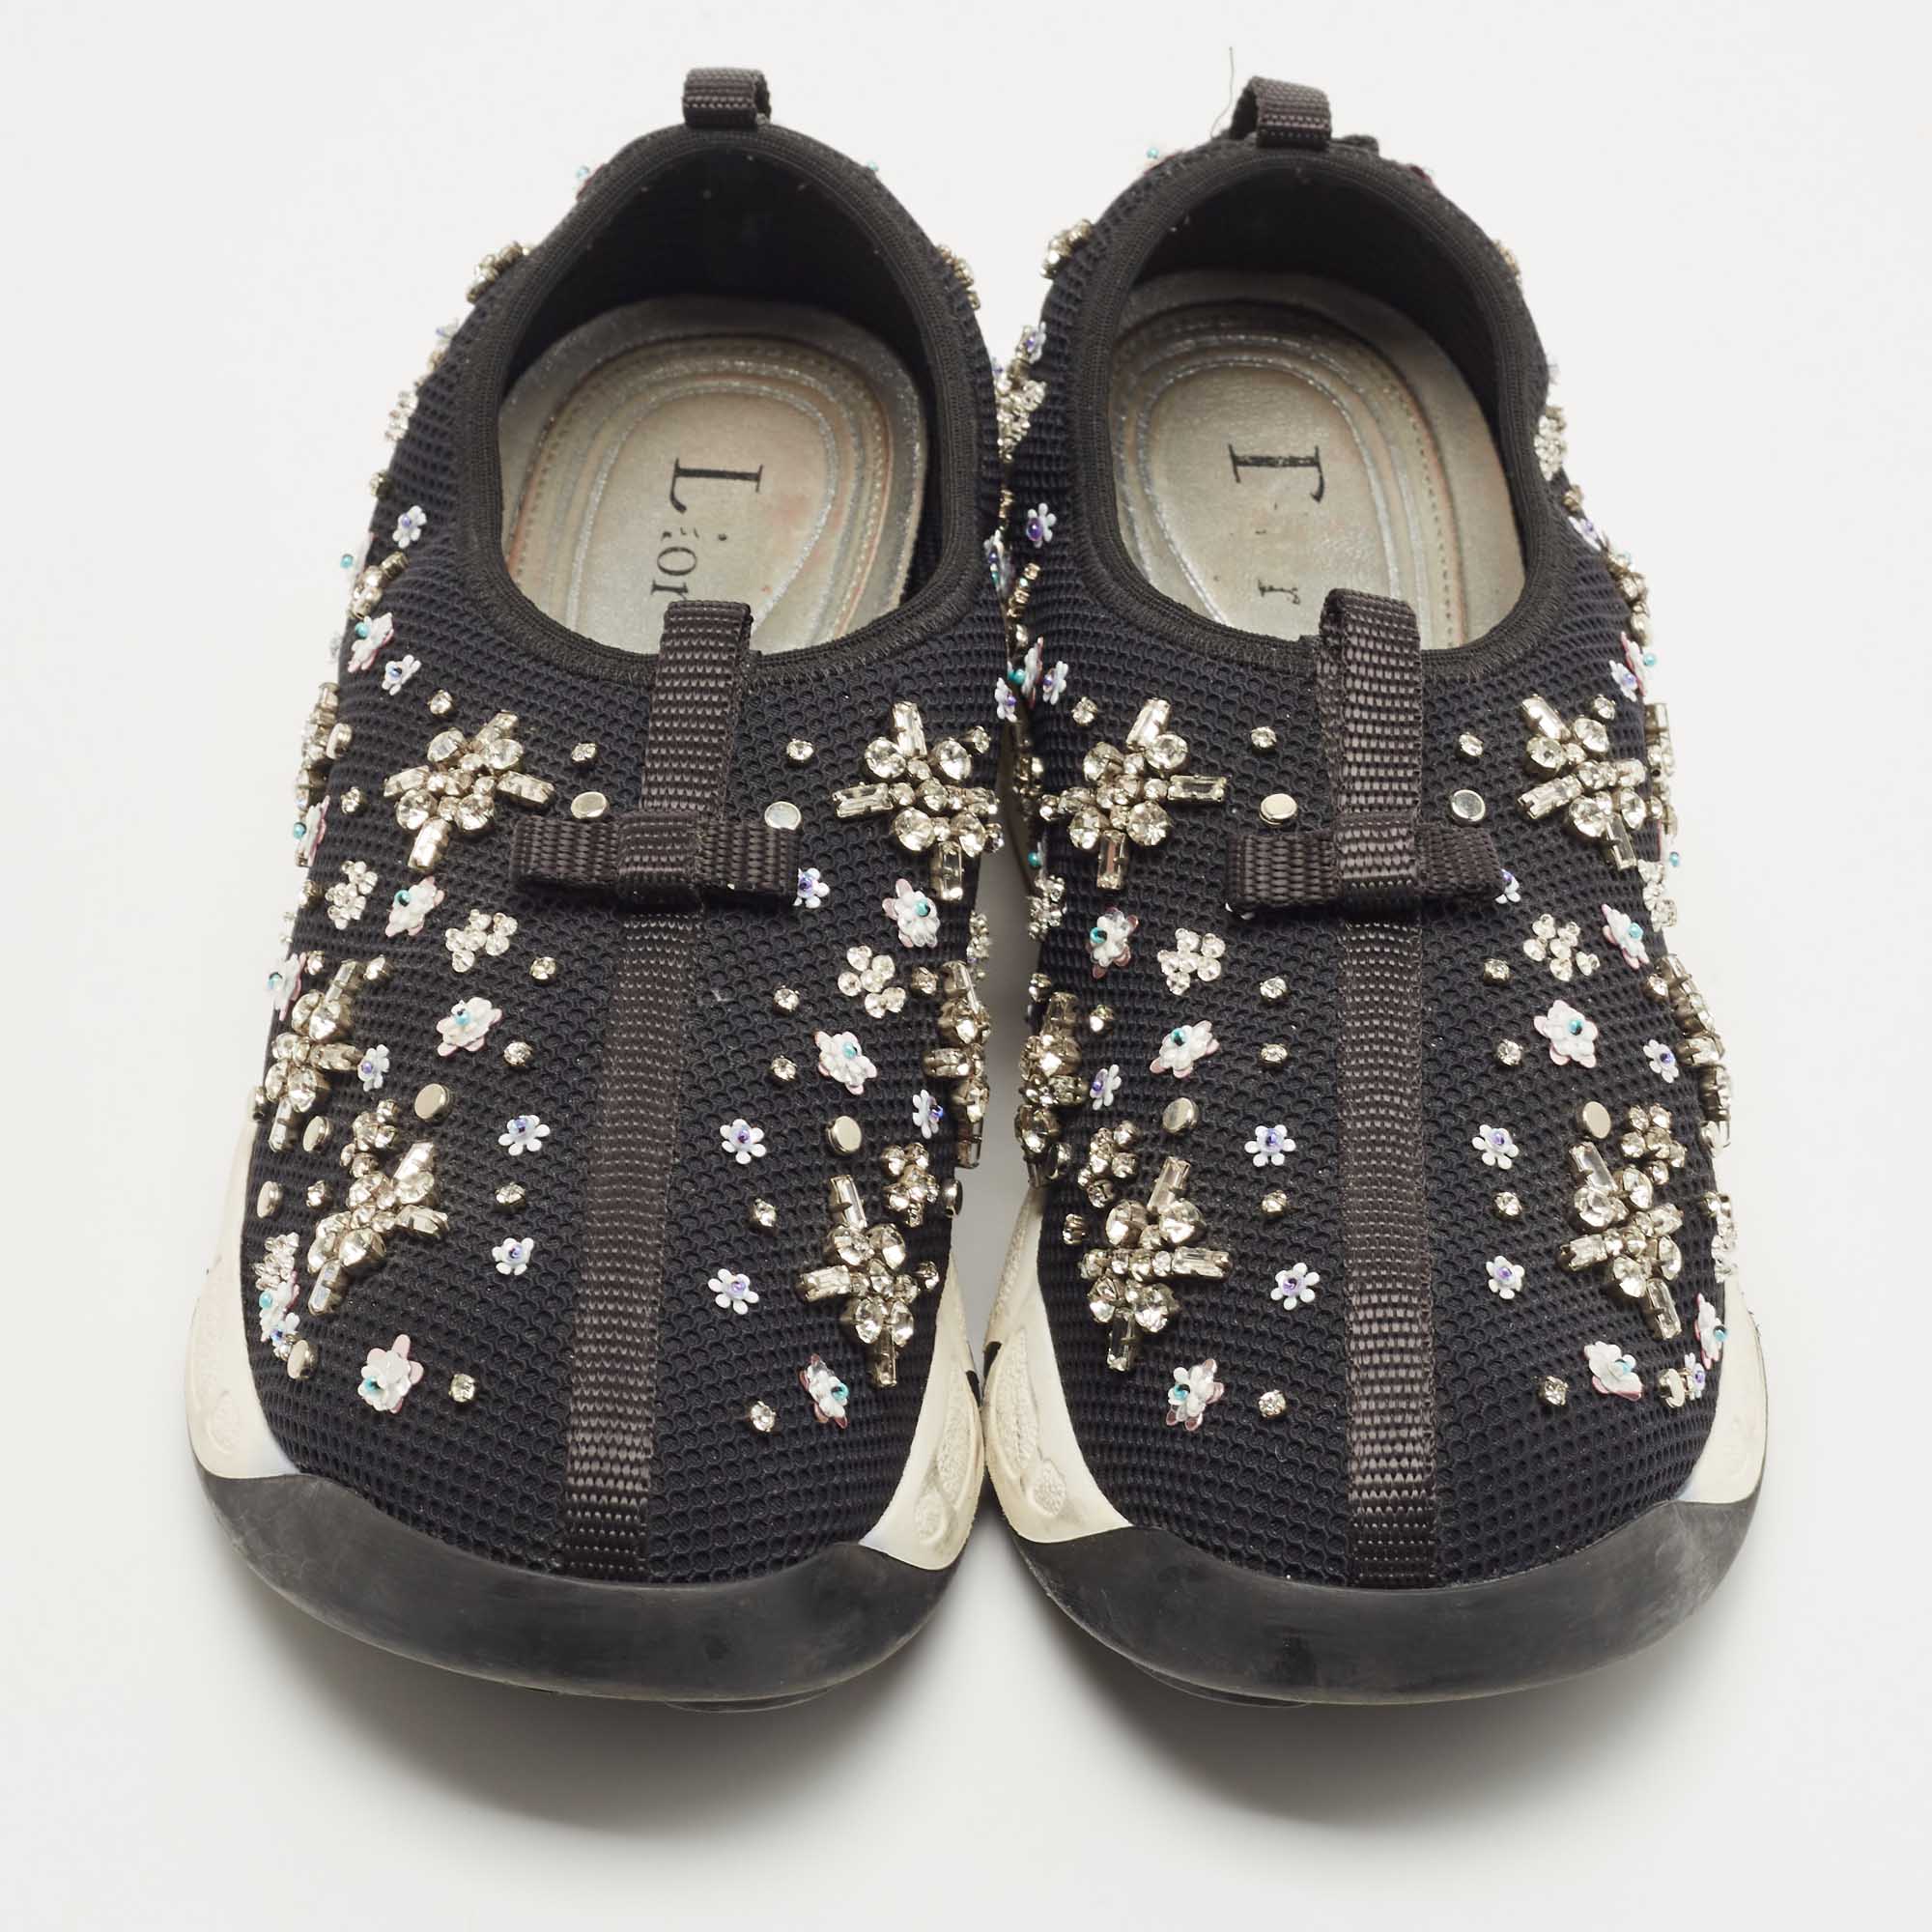 Dior Black Crystal Embellished Mesh Fusion Sneakers Size 40.5